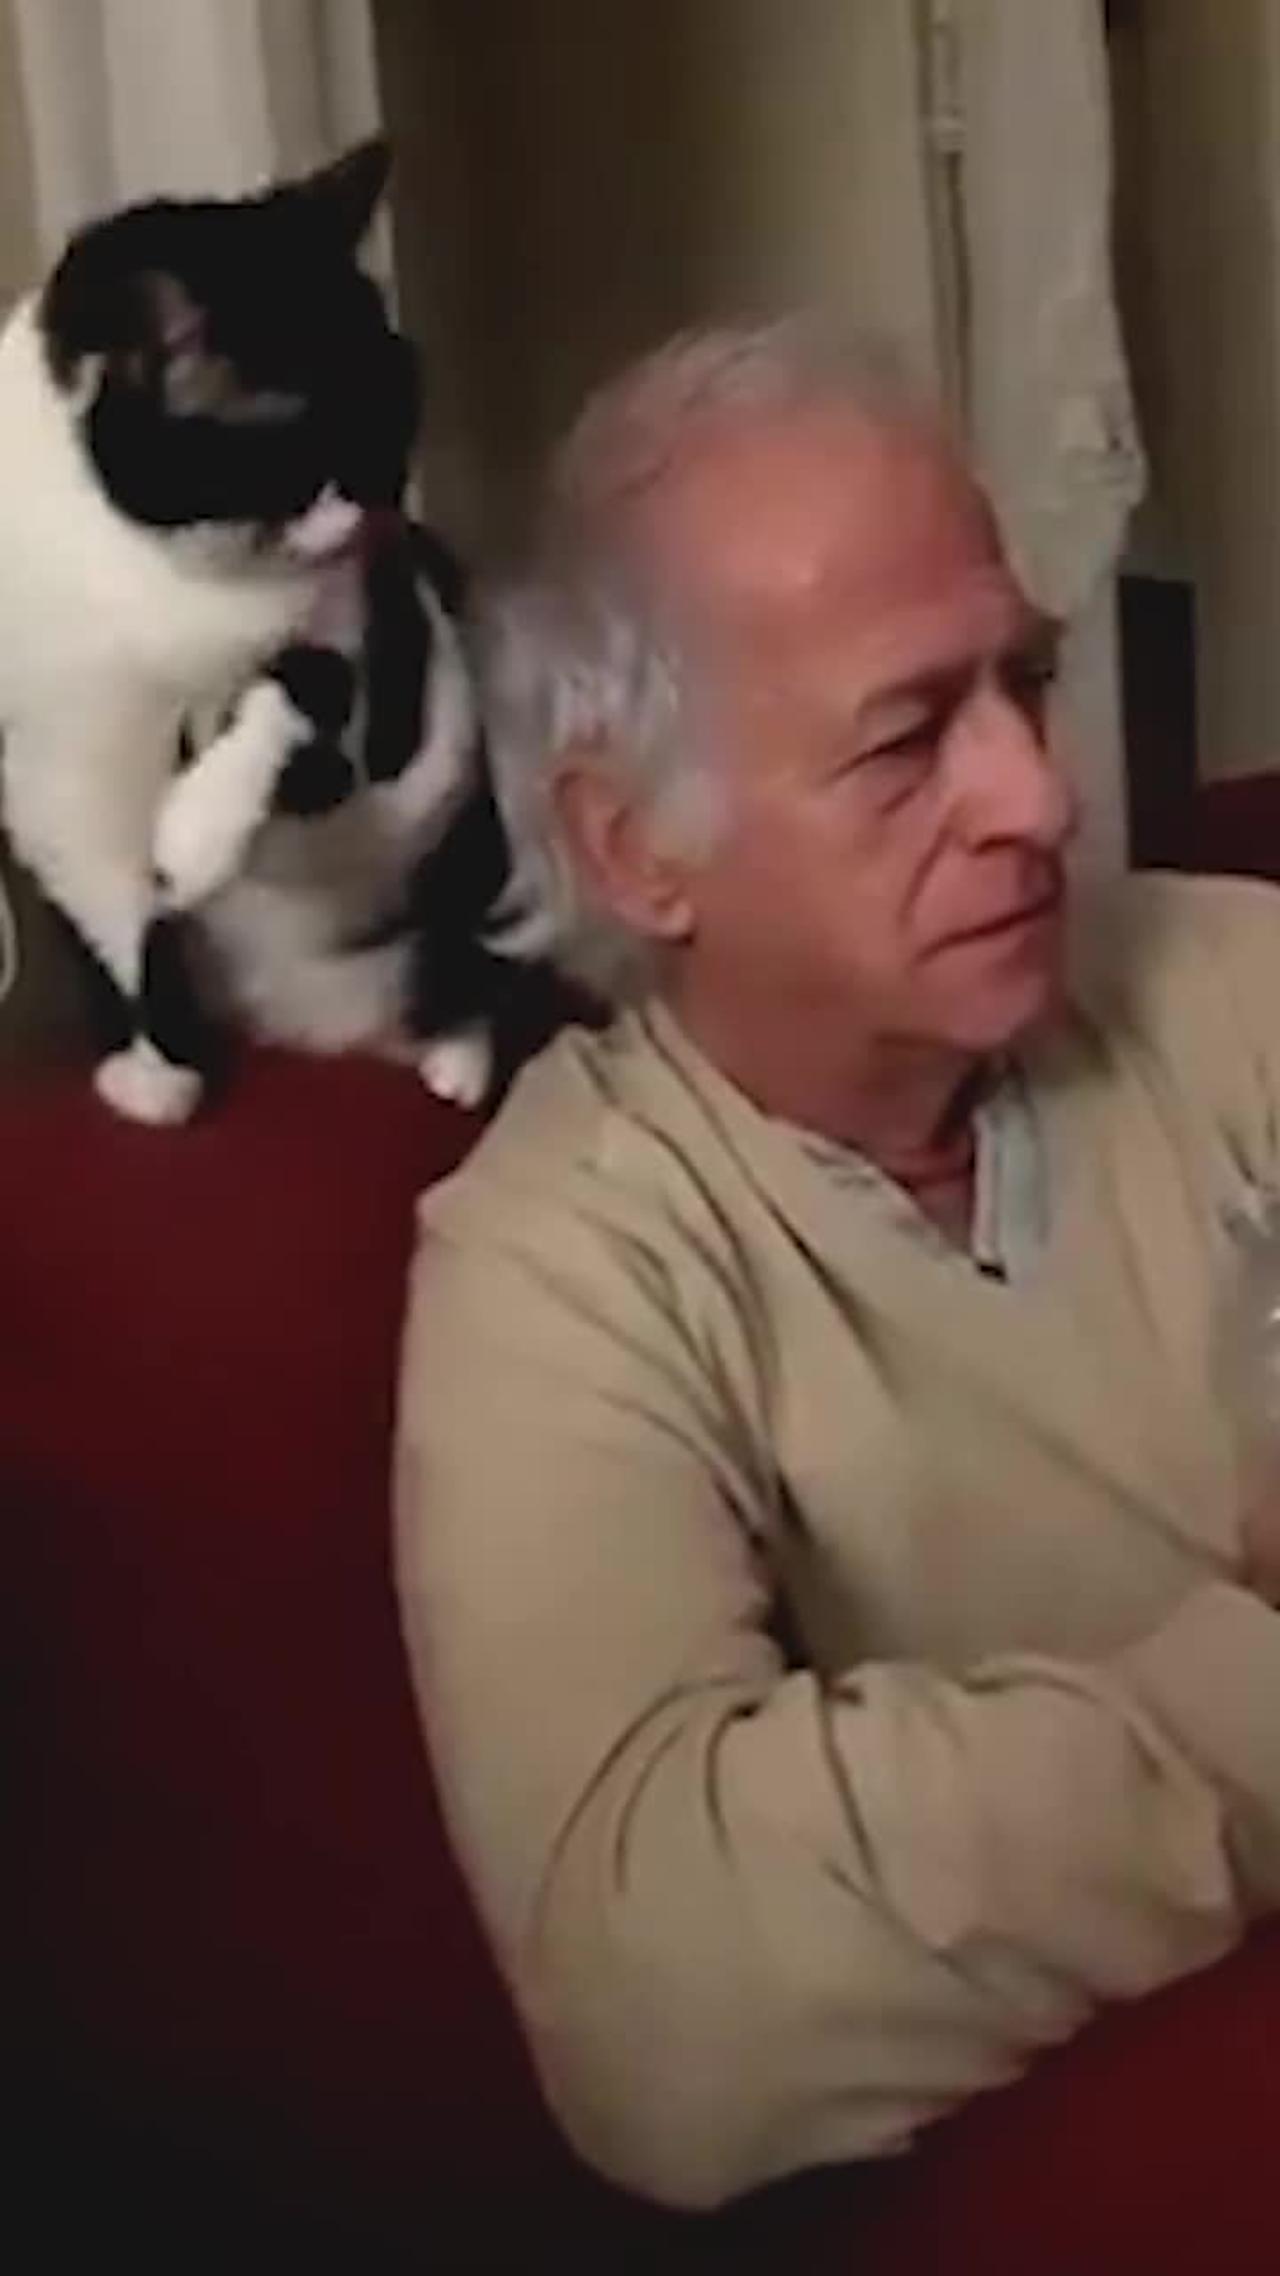 Hilarious Cat Pranks Pet Parent By Licking Head! #Shorts #Cats #Funny